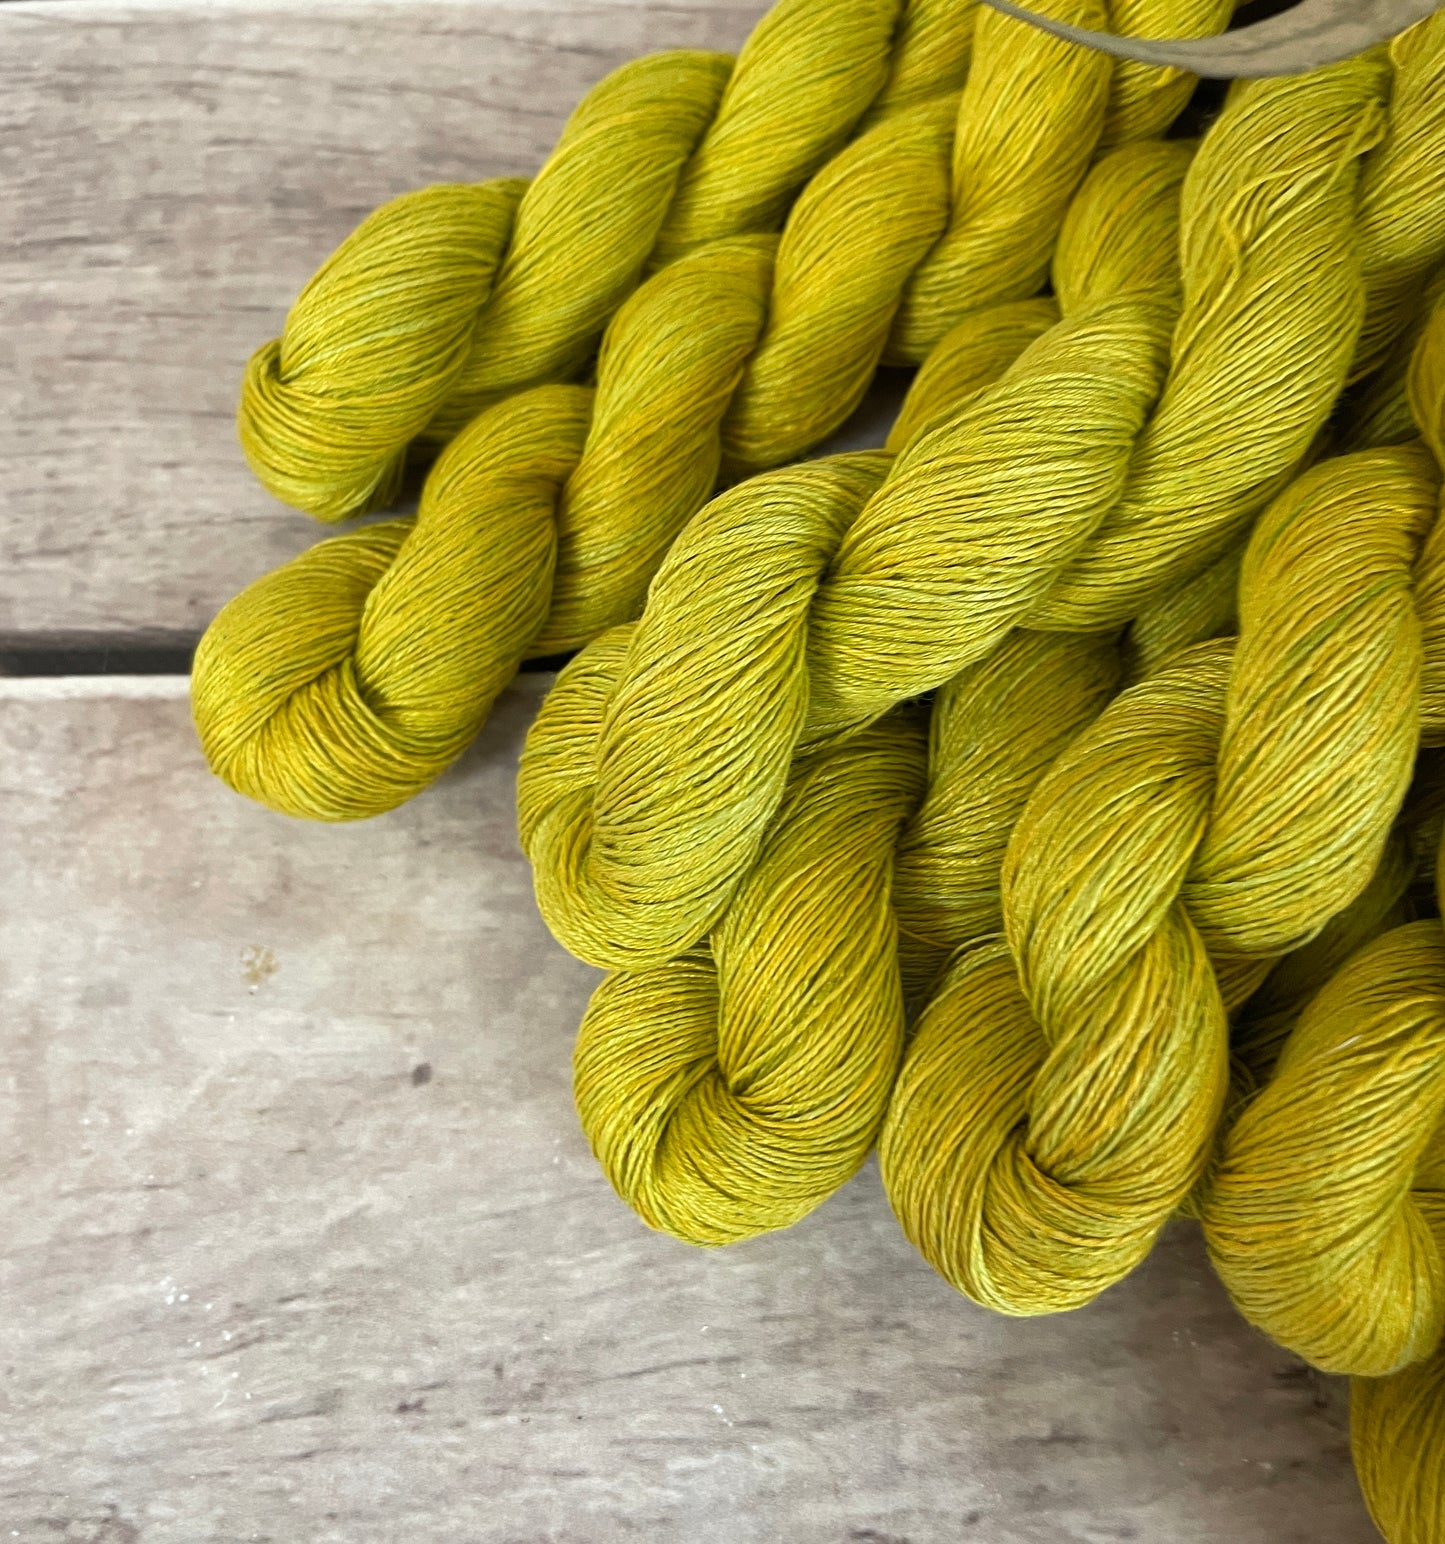 Green Age on Lotus pure linen yarn - 50 gm skeins